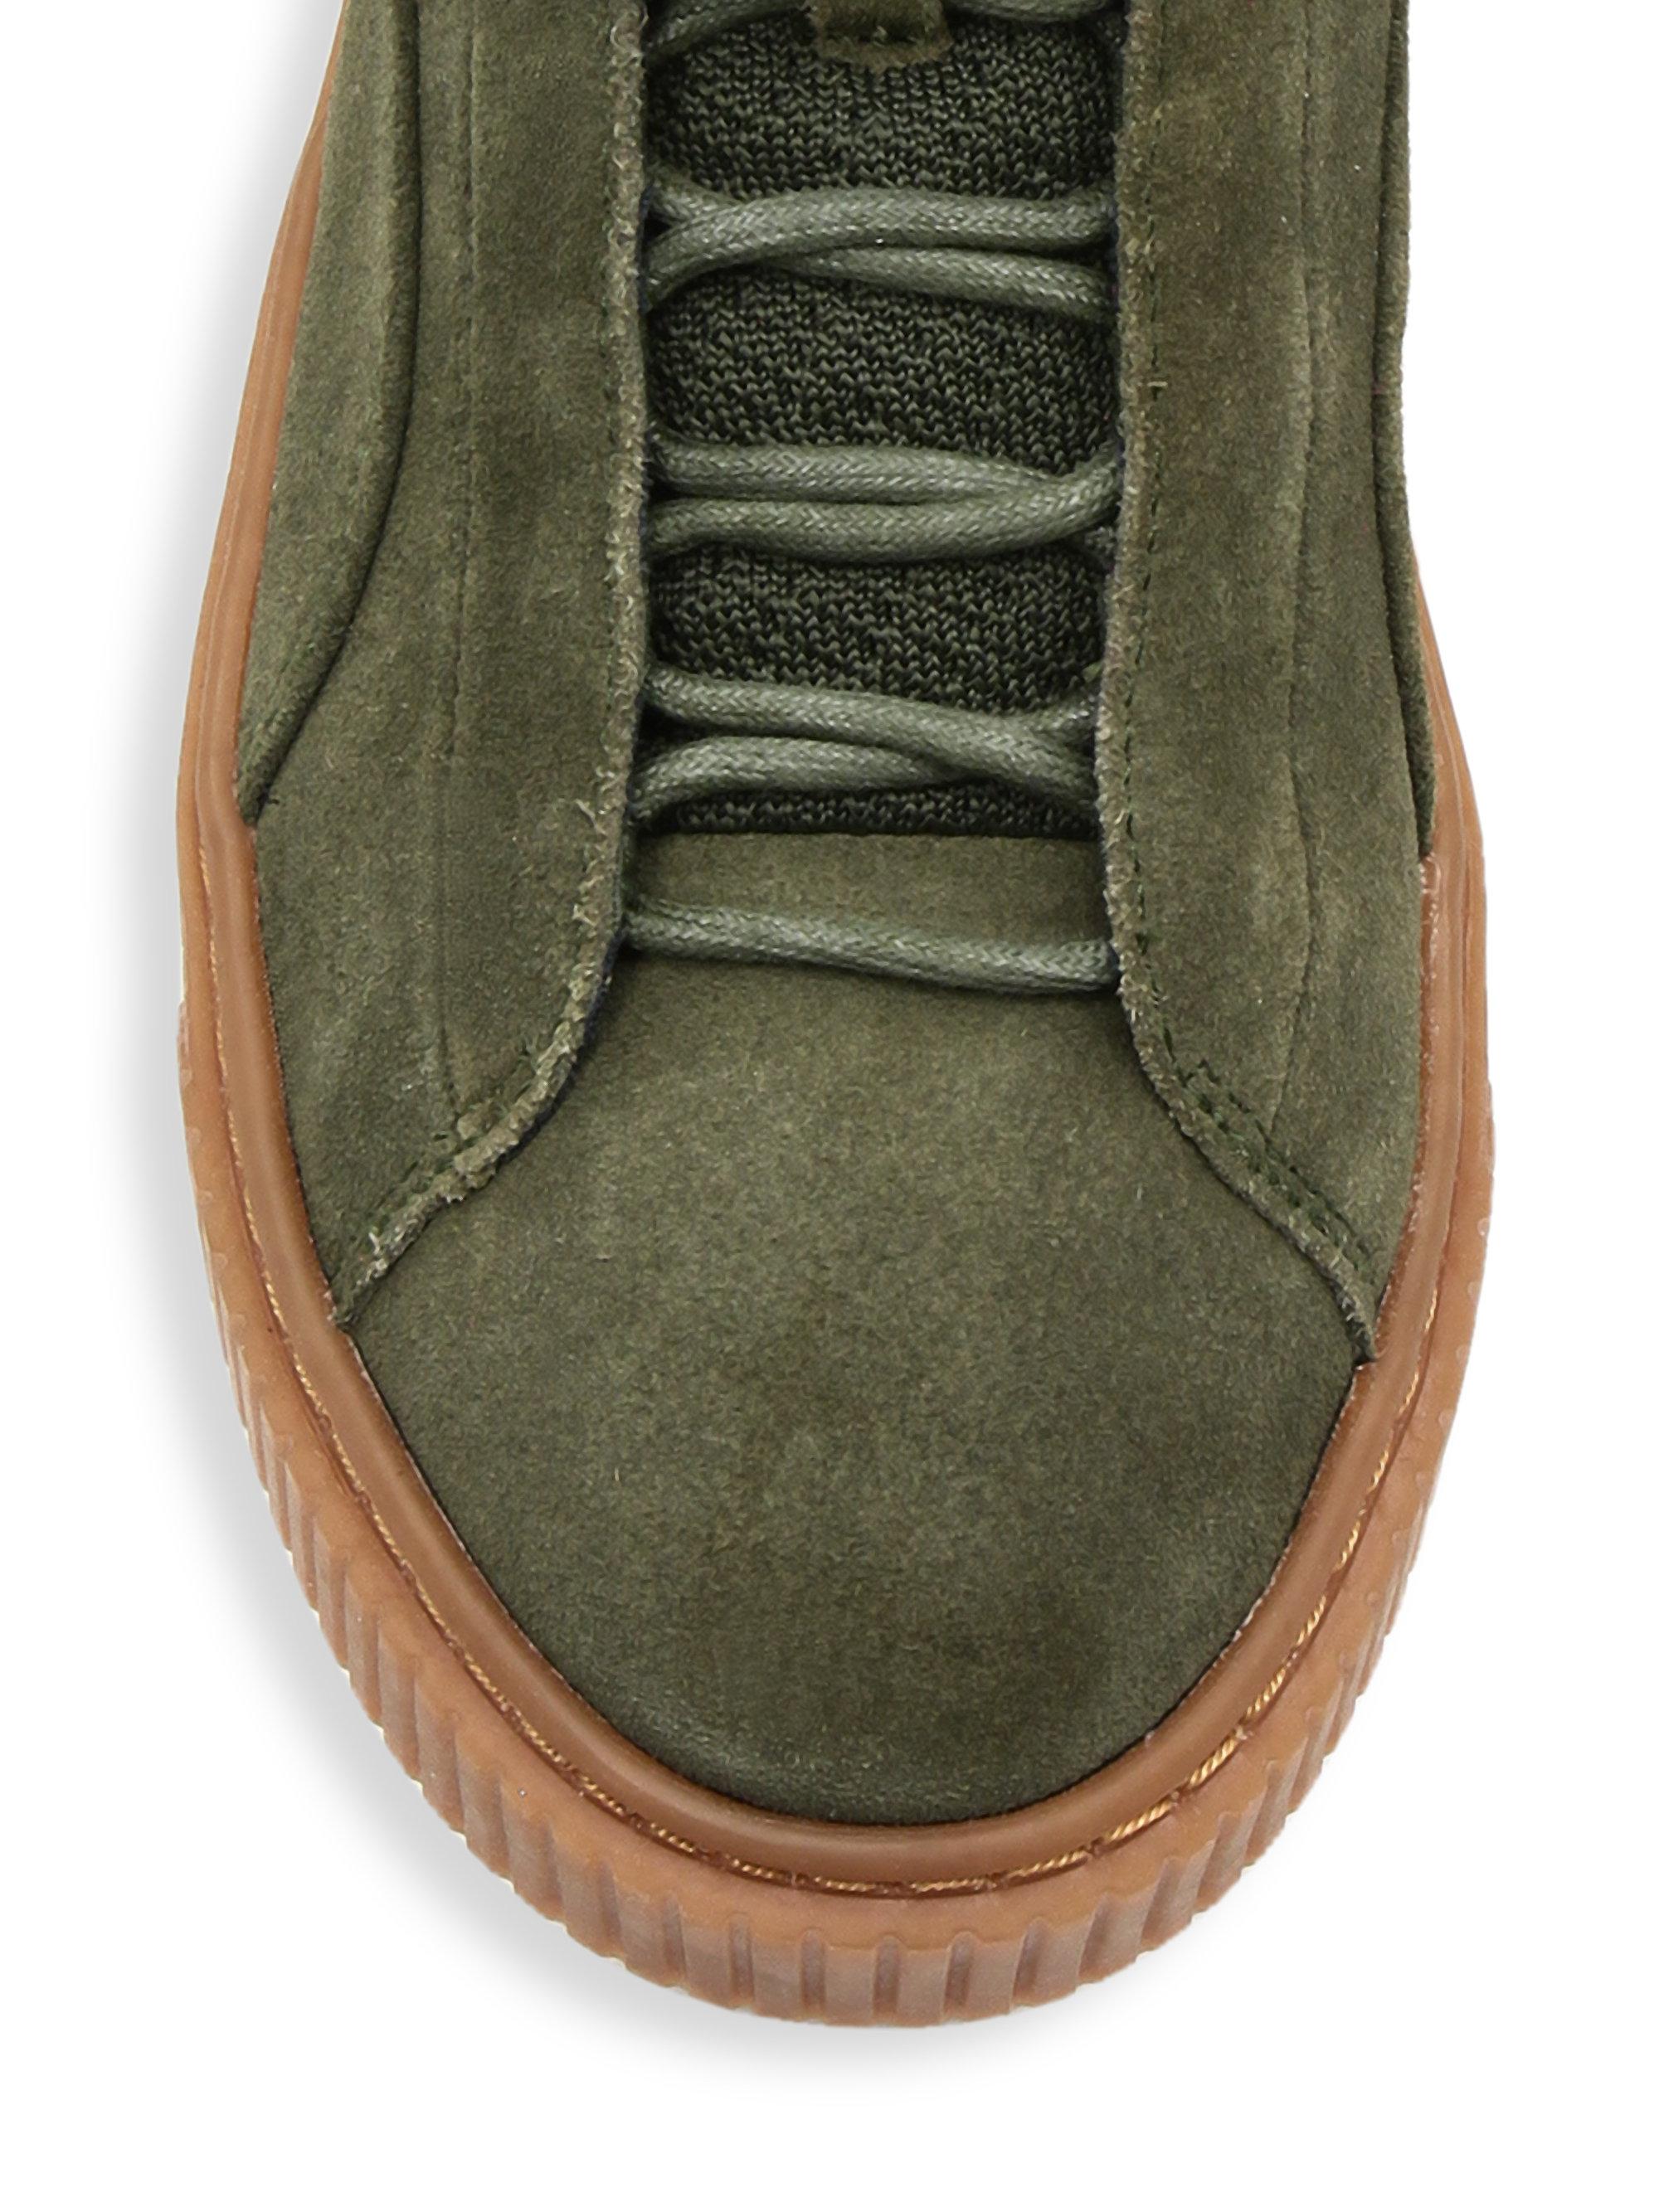 PUMA Suede Mid-top Sneakers in Olive Green (Green) for Men - Lyst